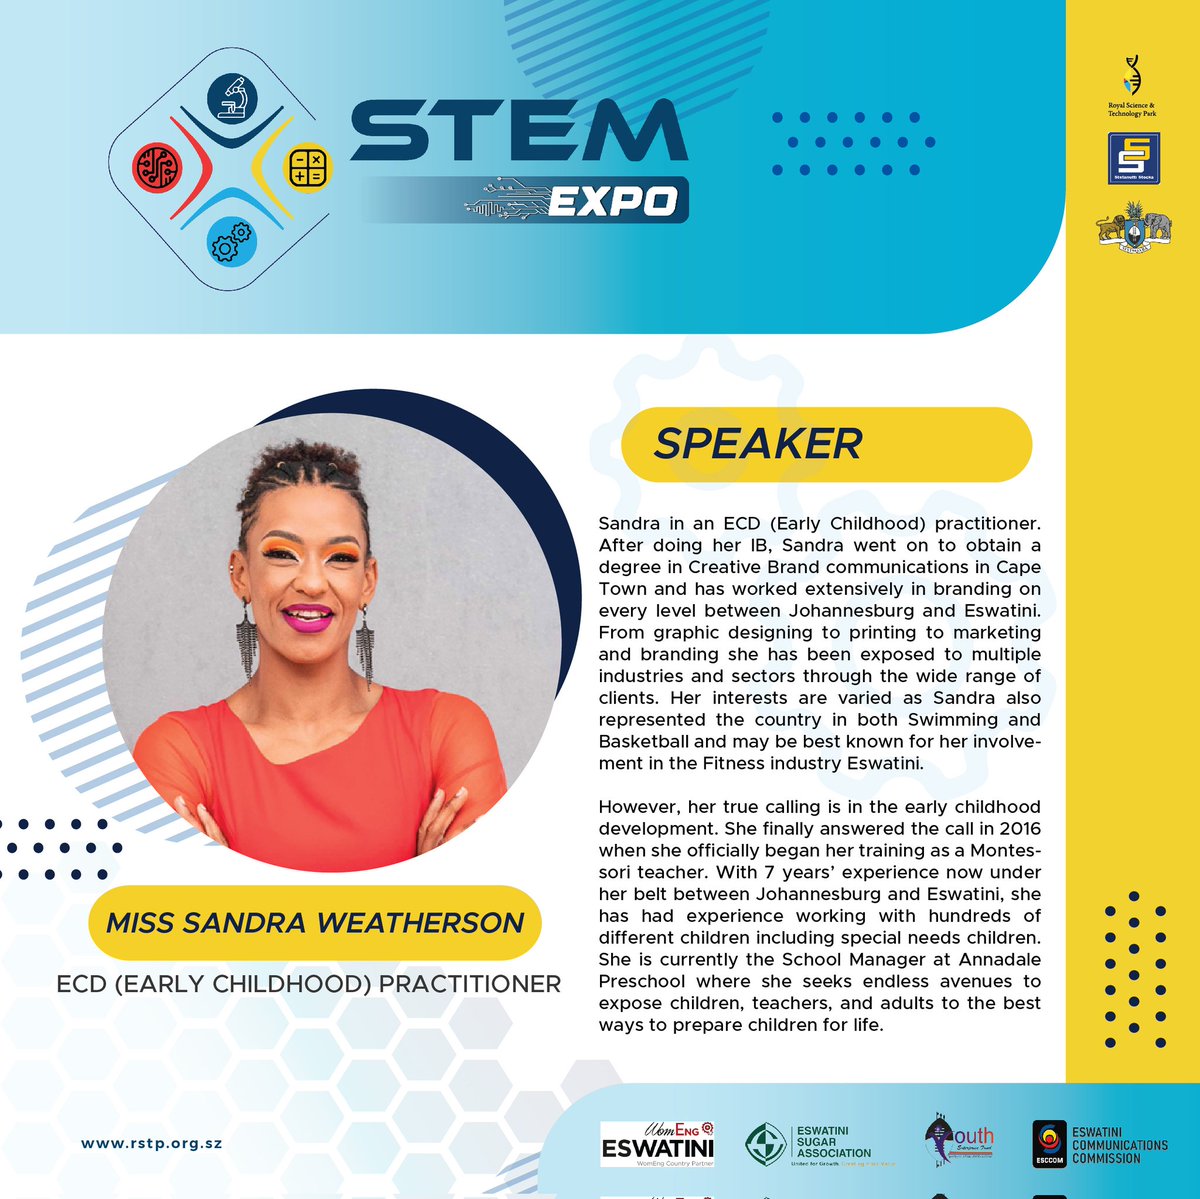 STEM EXPO 2023 SPEAKER: ECD, Early Childhood Practitioner Ms. Sandra Weatherson will be sharing more on how challenging and rewarding it was to follow her passion when switching careers. #stemexpo2023 #stemfutureskills